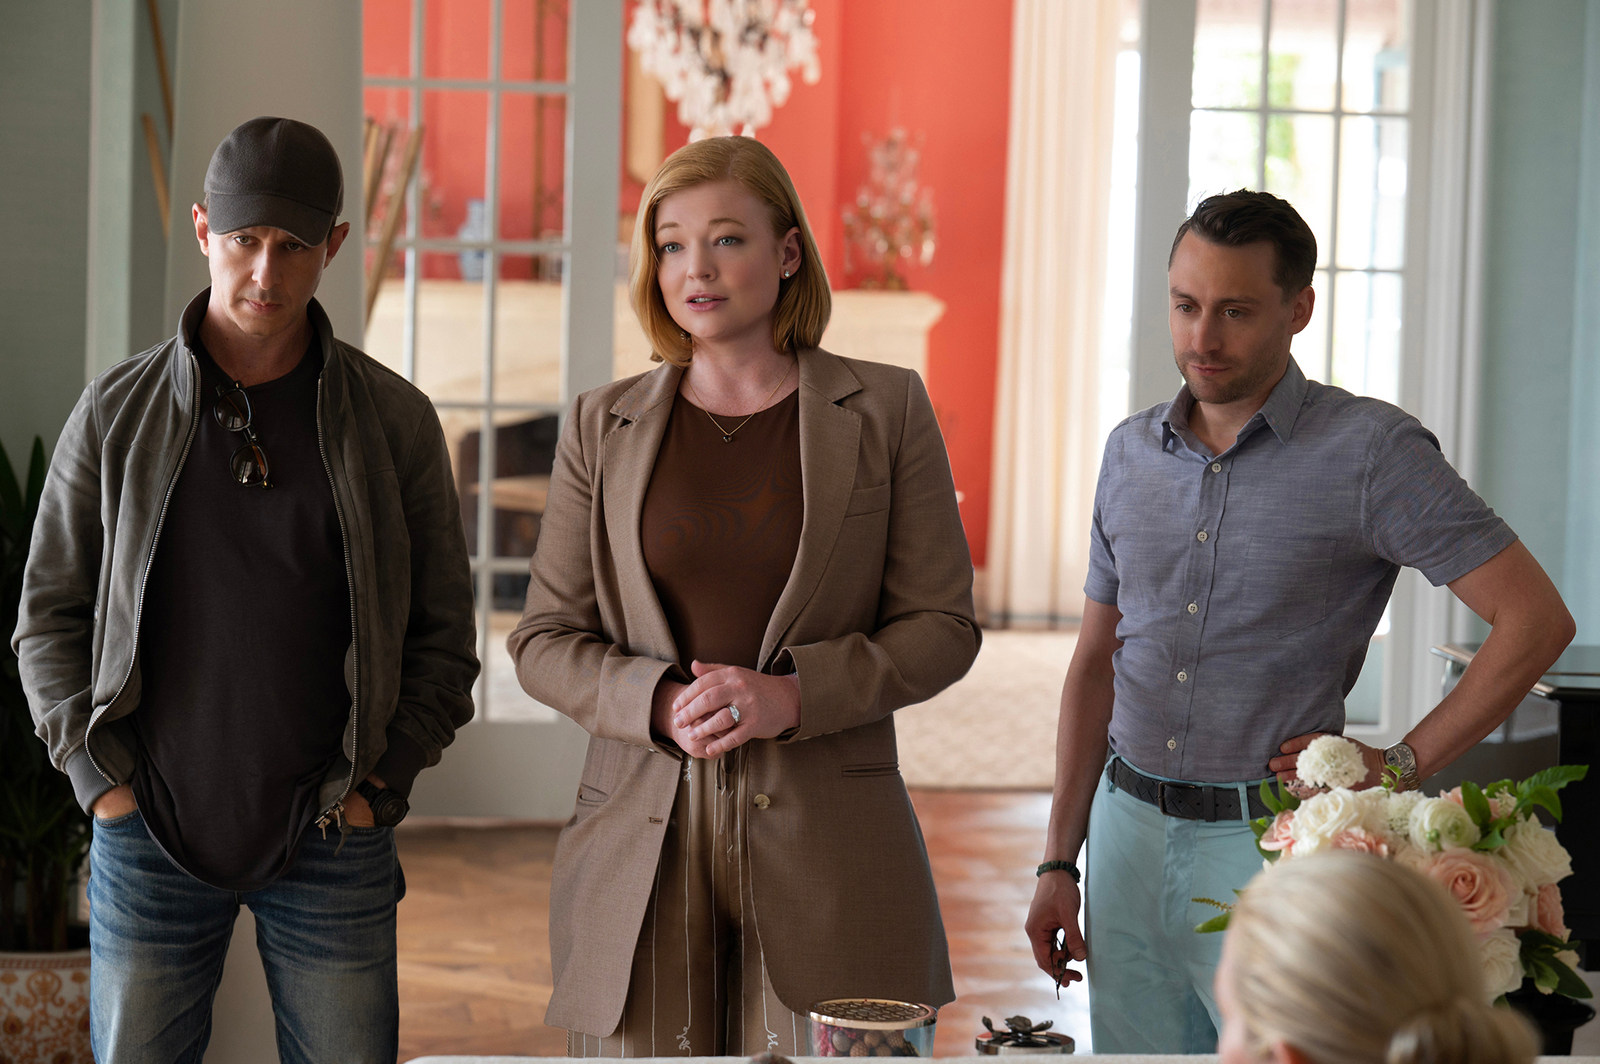 Succession stars Jeremy Strong (left), Sarah Snook and Kieran Culkin have been nominated for best drama actor and actress Emmys. Photo: HBO via TNS